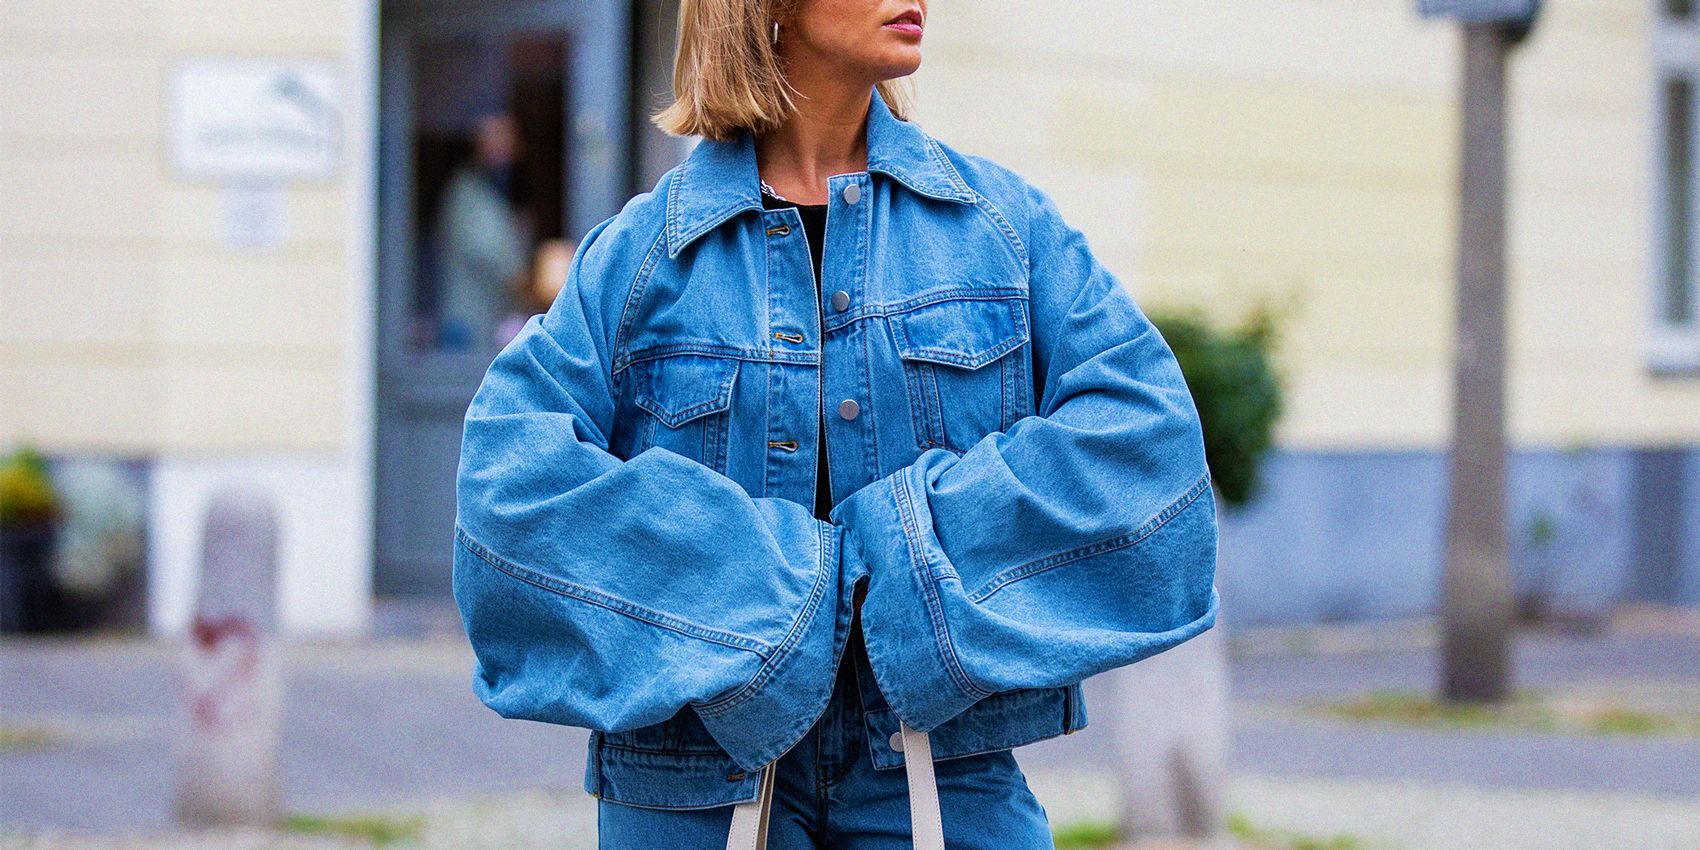 Denim Thread 100% Cotton Light Washed Relaxed Fitting Boyfriend Style  Women's Denim Jacket no Embroidery - Etsy